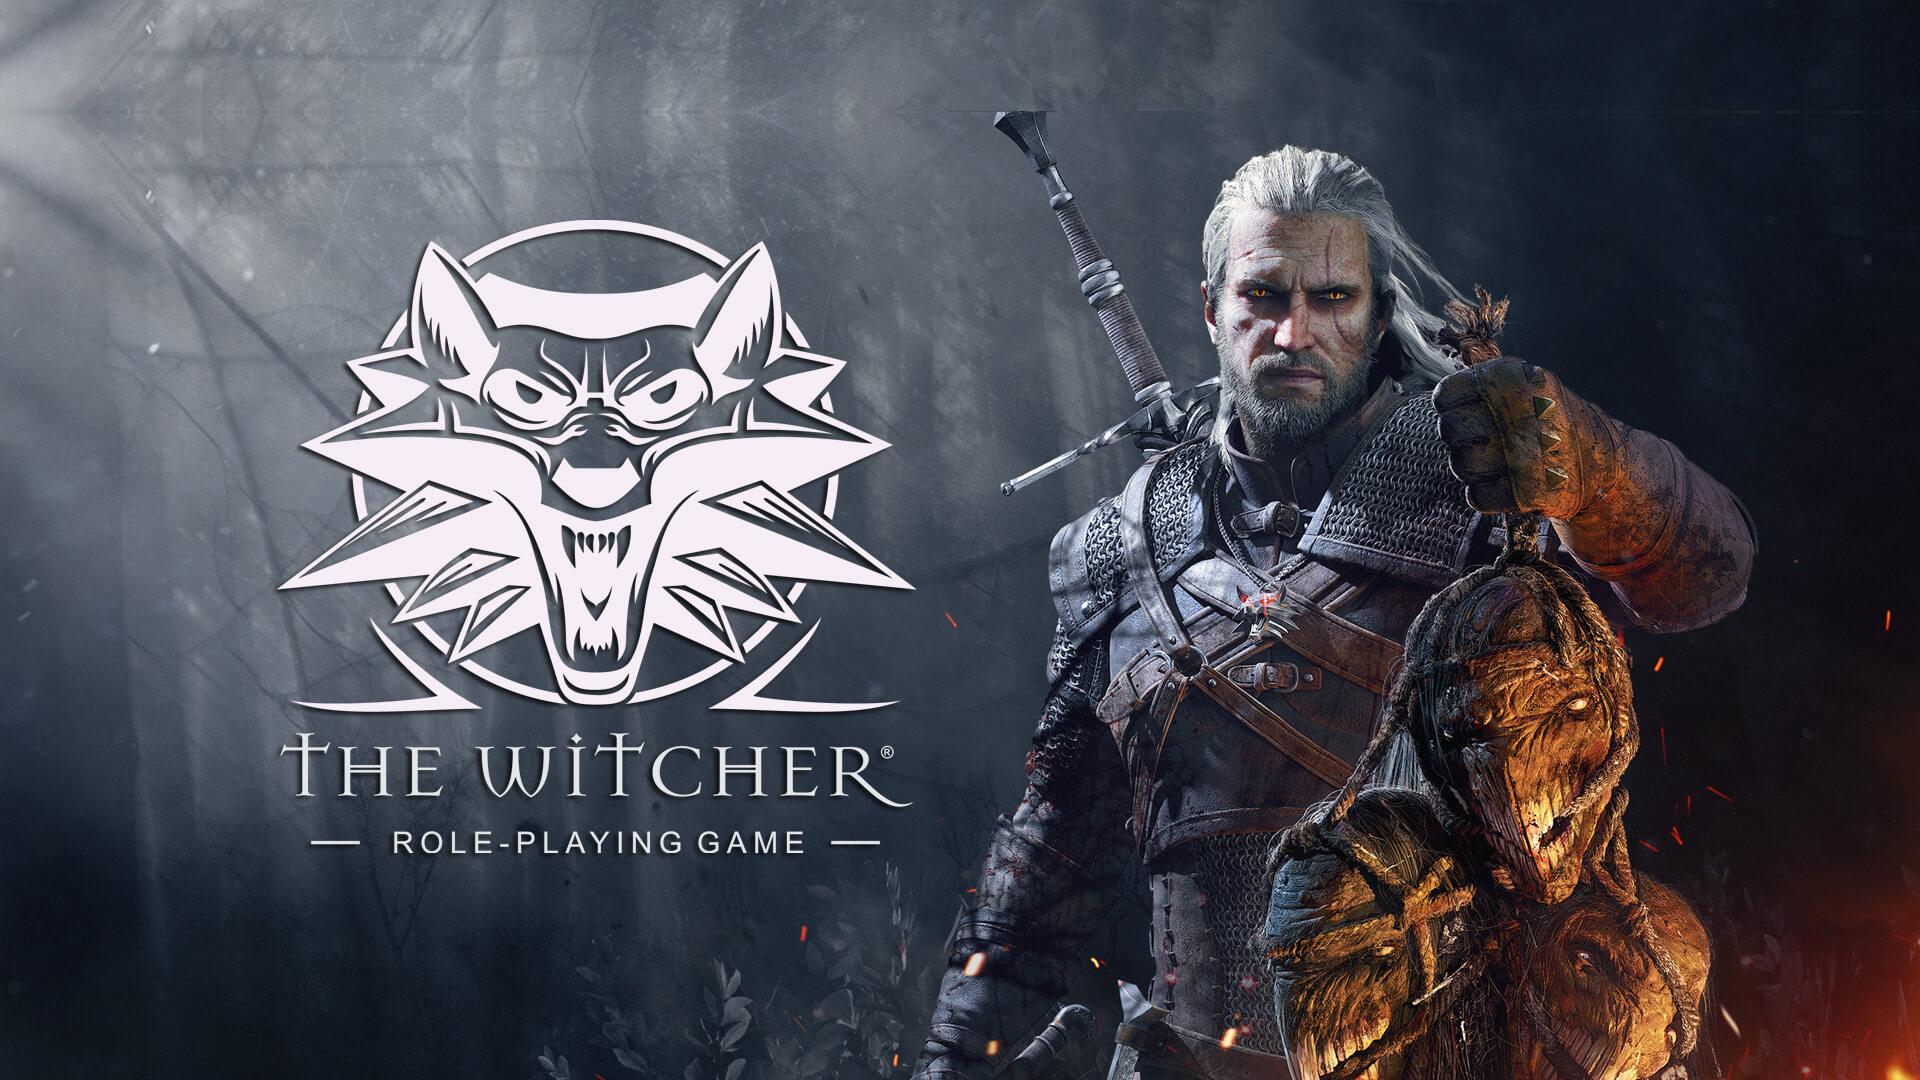 The Witcher RPG